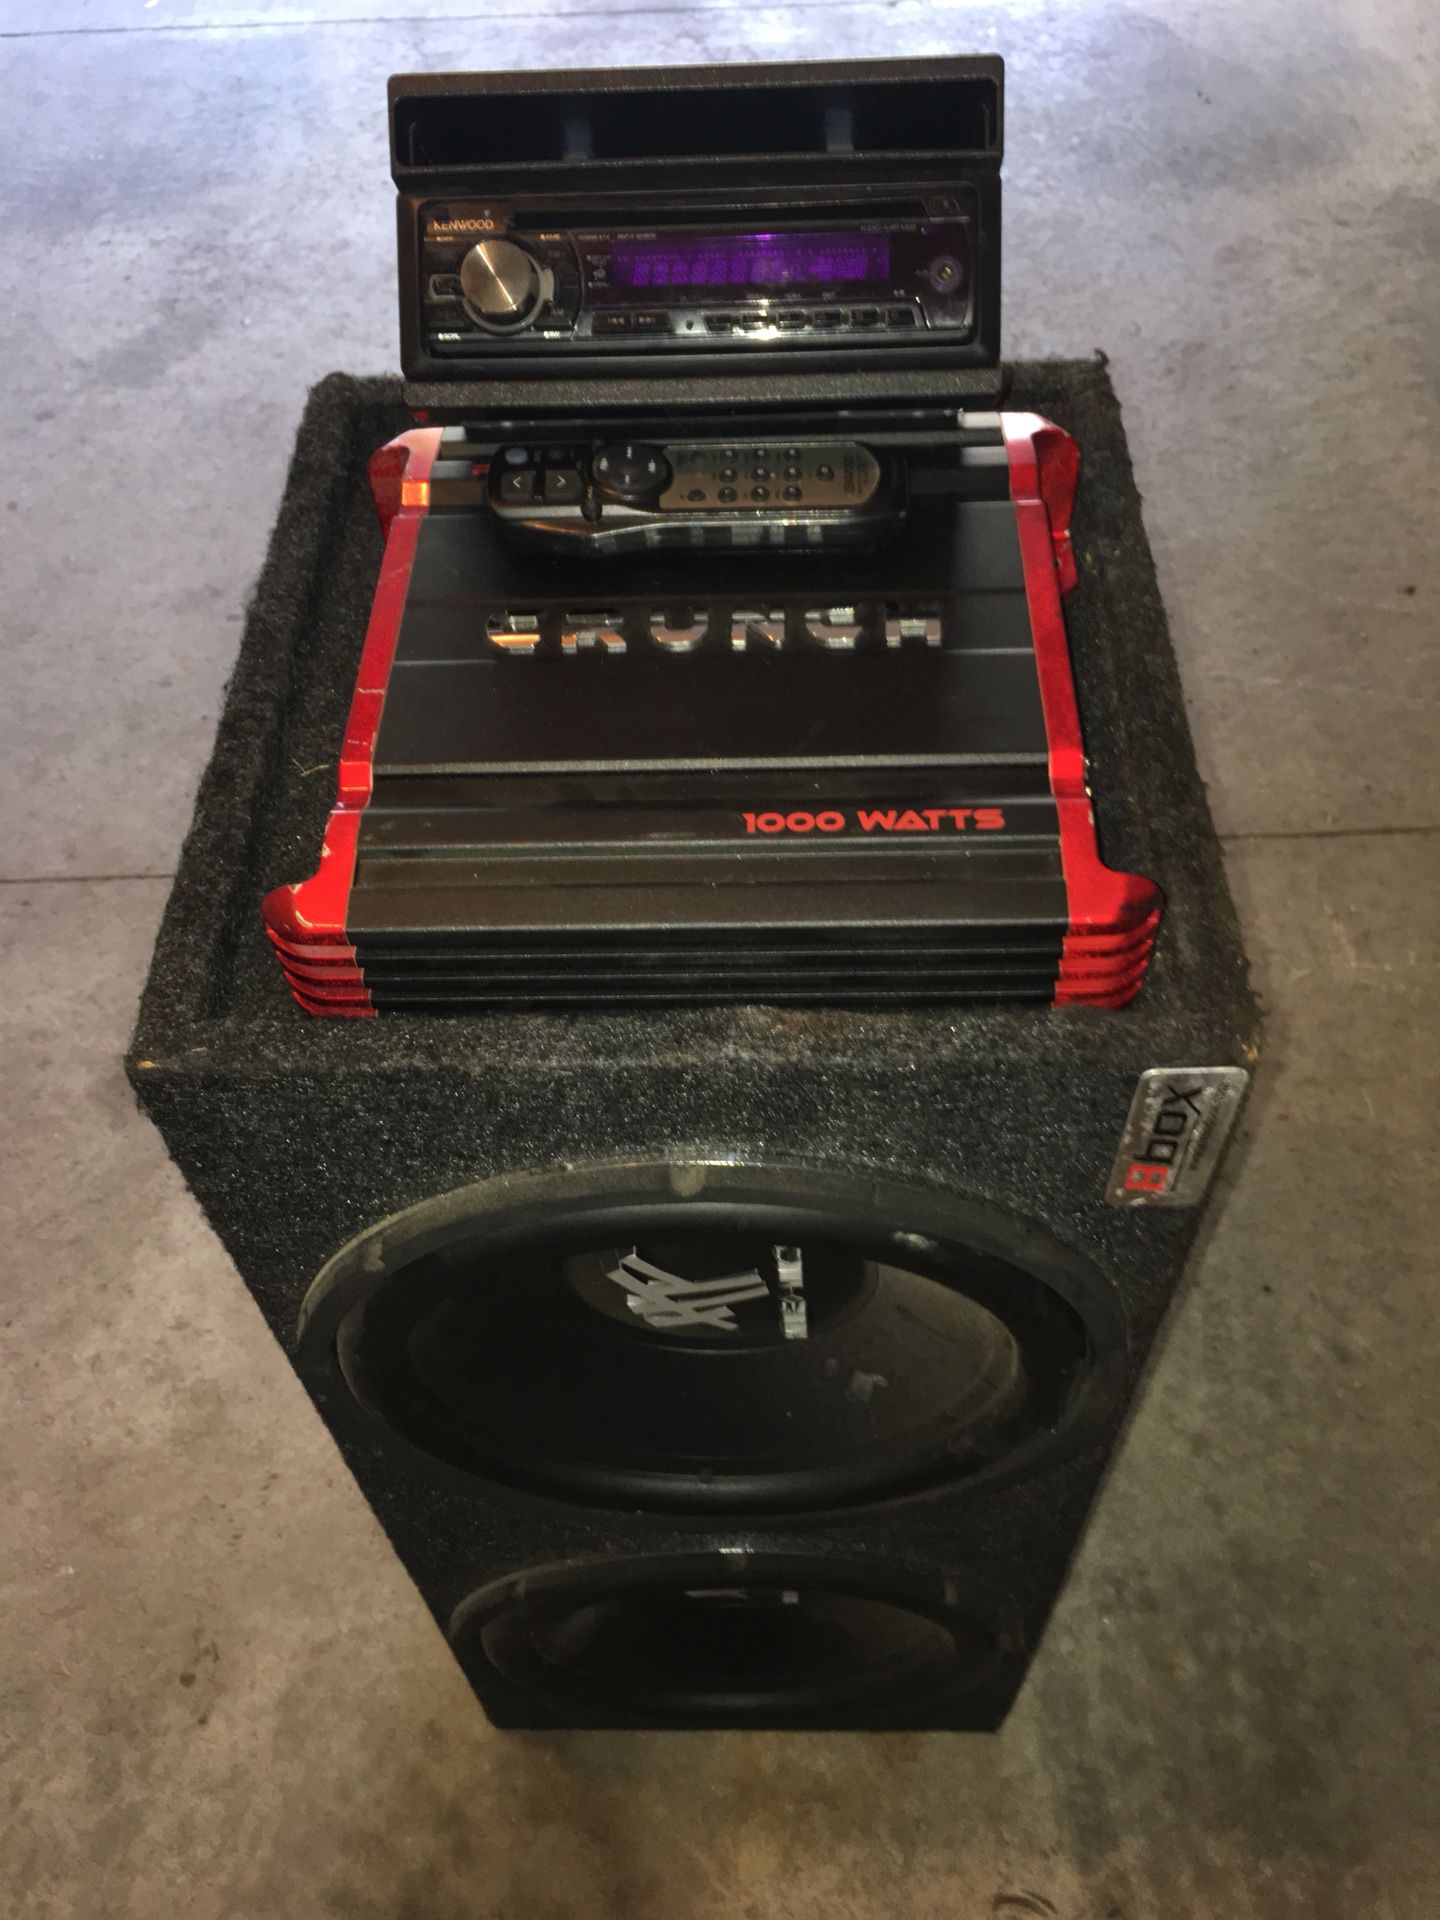 Kenwood CD Changer Radio with Remote Control, Crunch 1000 Watt Amplifier and Hifonics 2 12 Inch Woofer Kickerbox. Sounds immaculate!